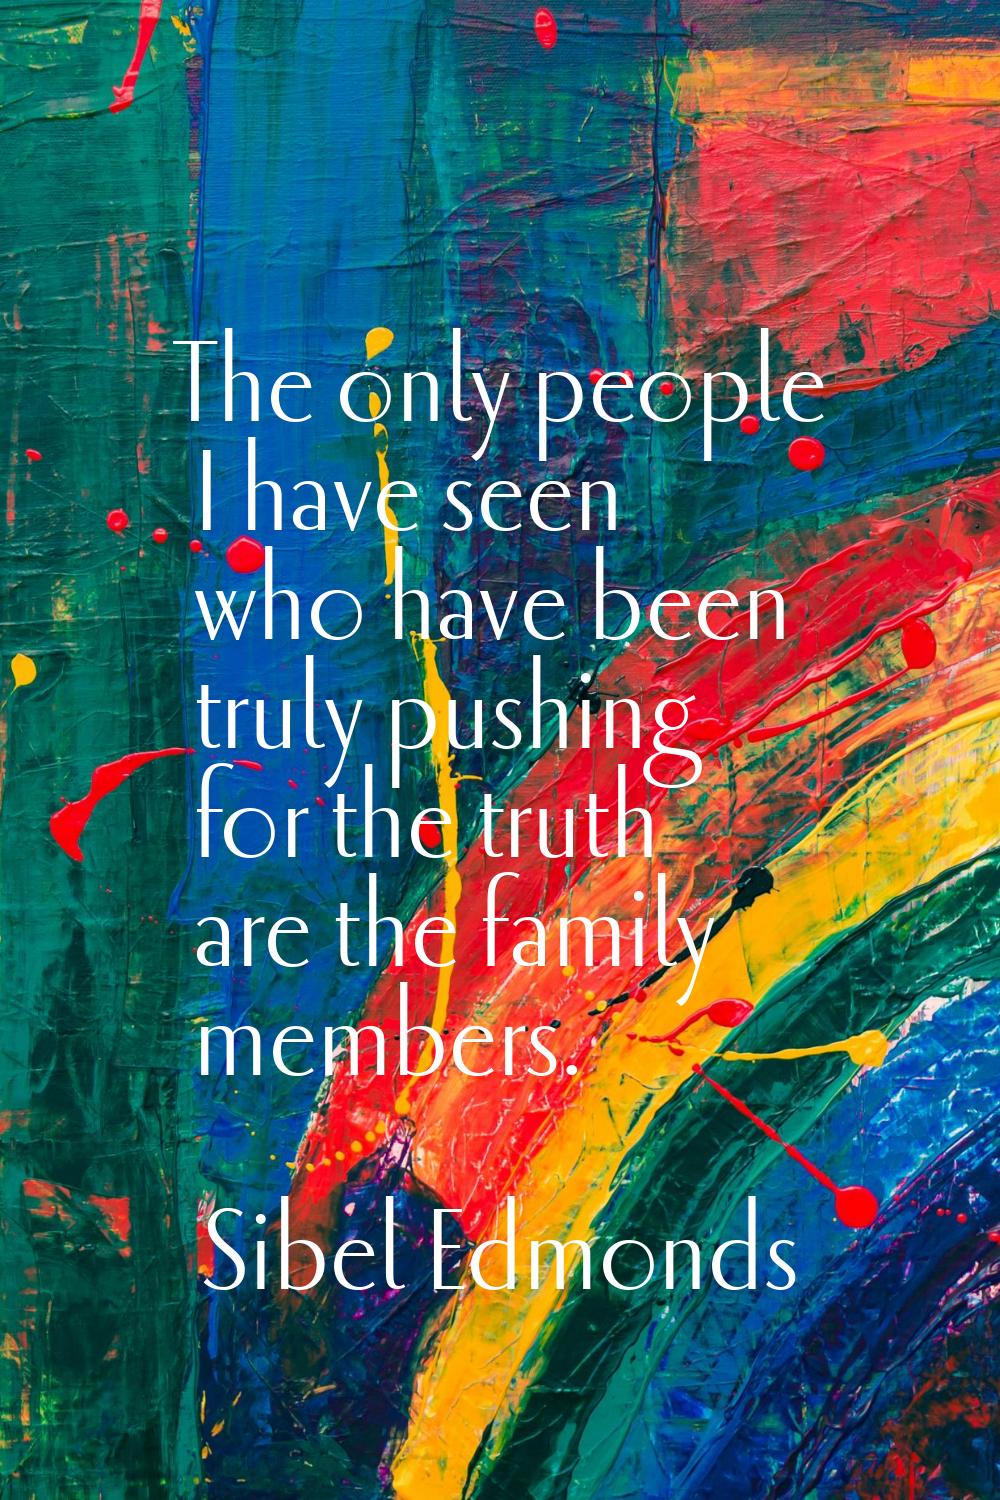 The only people I have seen who have been truly pushing for the truth are the family members.